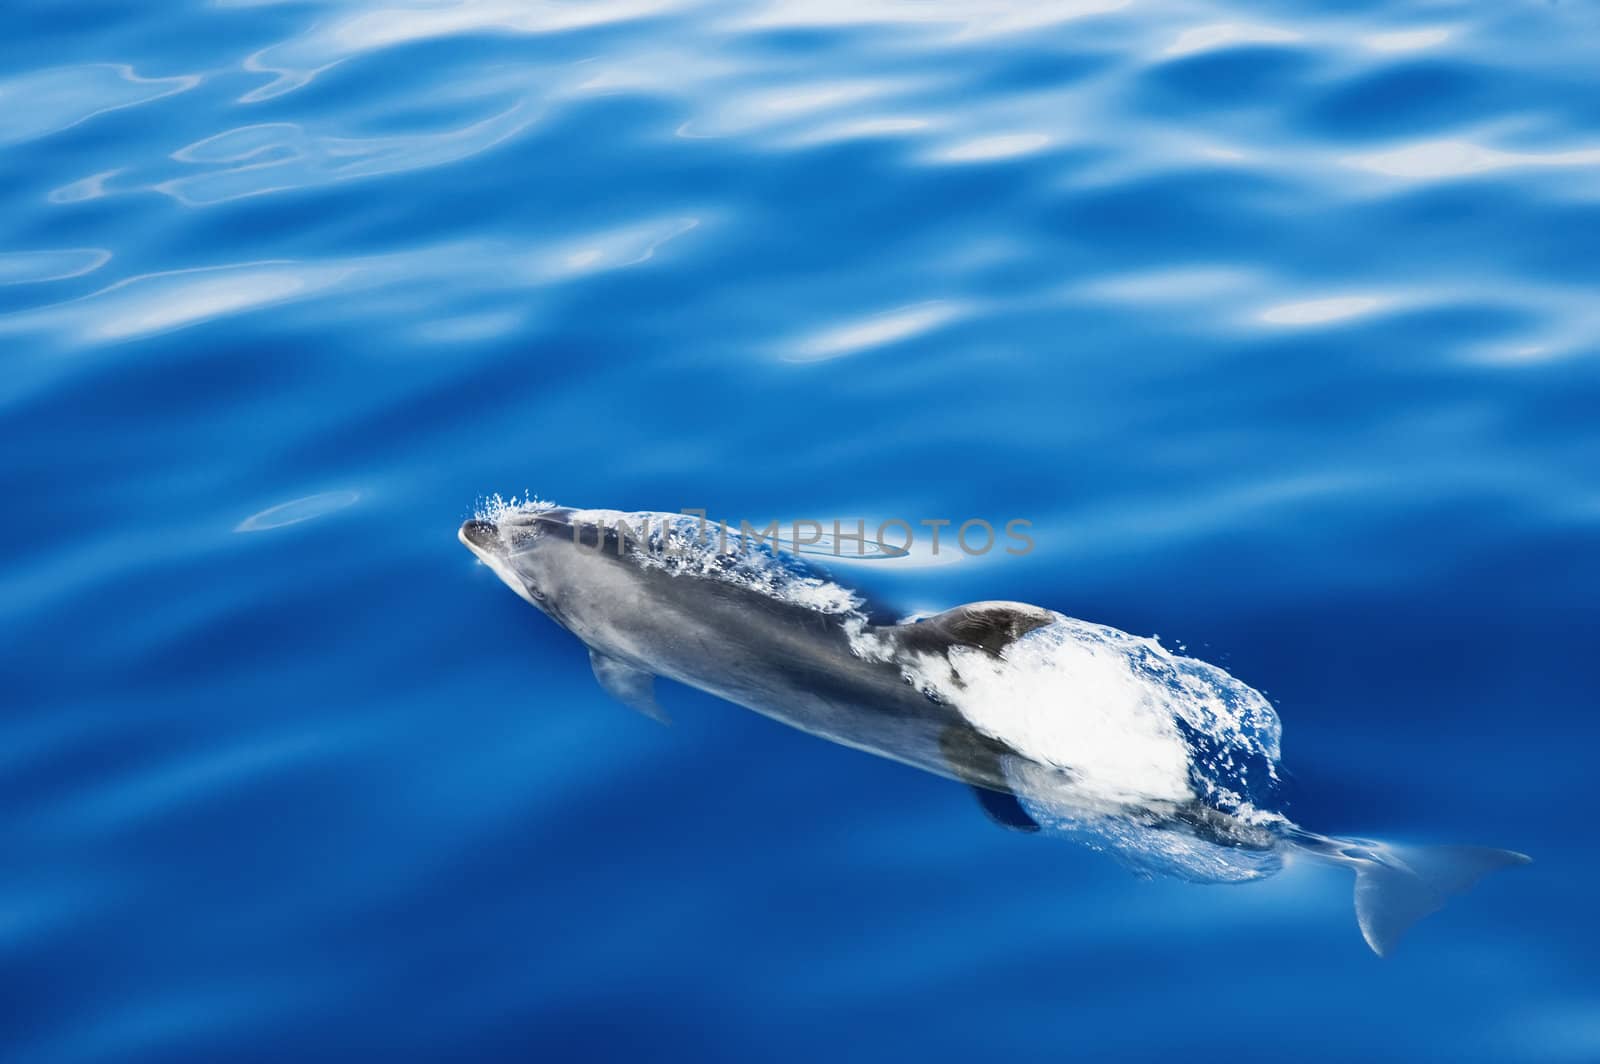 Dolphin swimming, Pico island, Azores by mrfotos